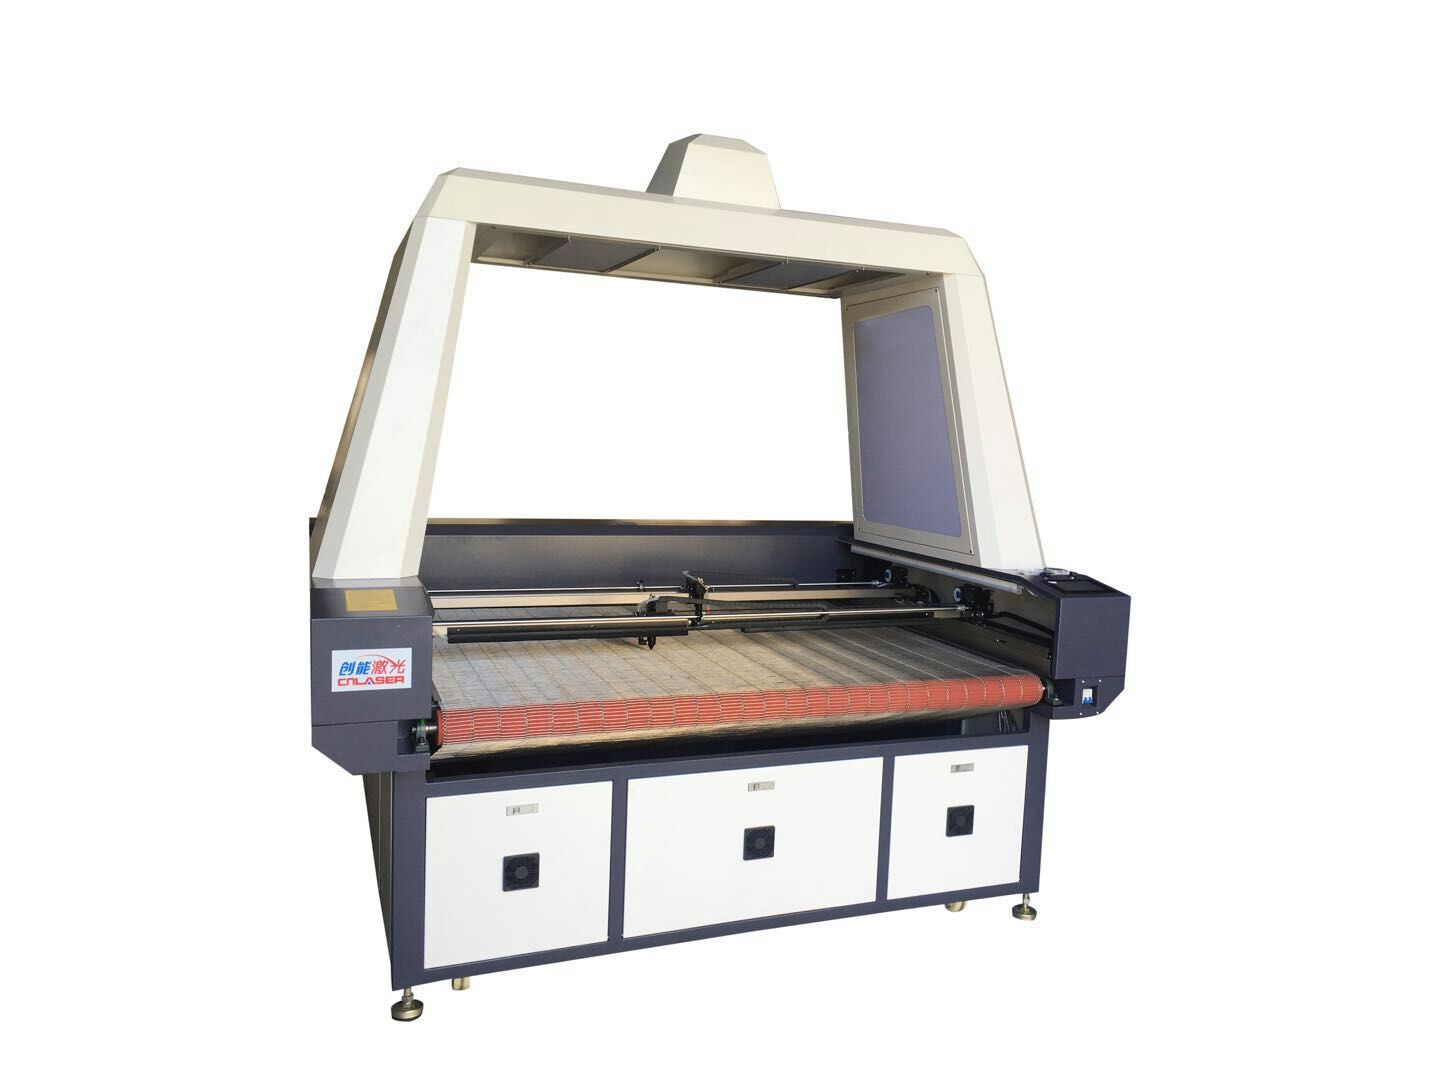 ZY1812 Double beam asynchronous laser cutting machine